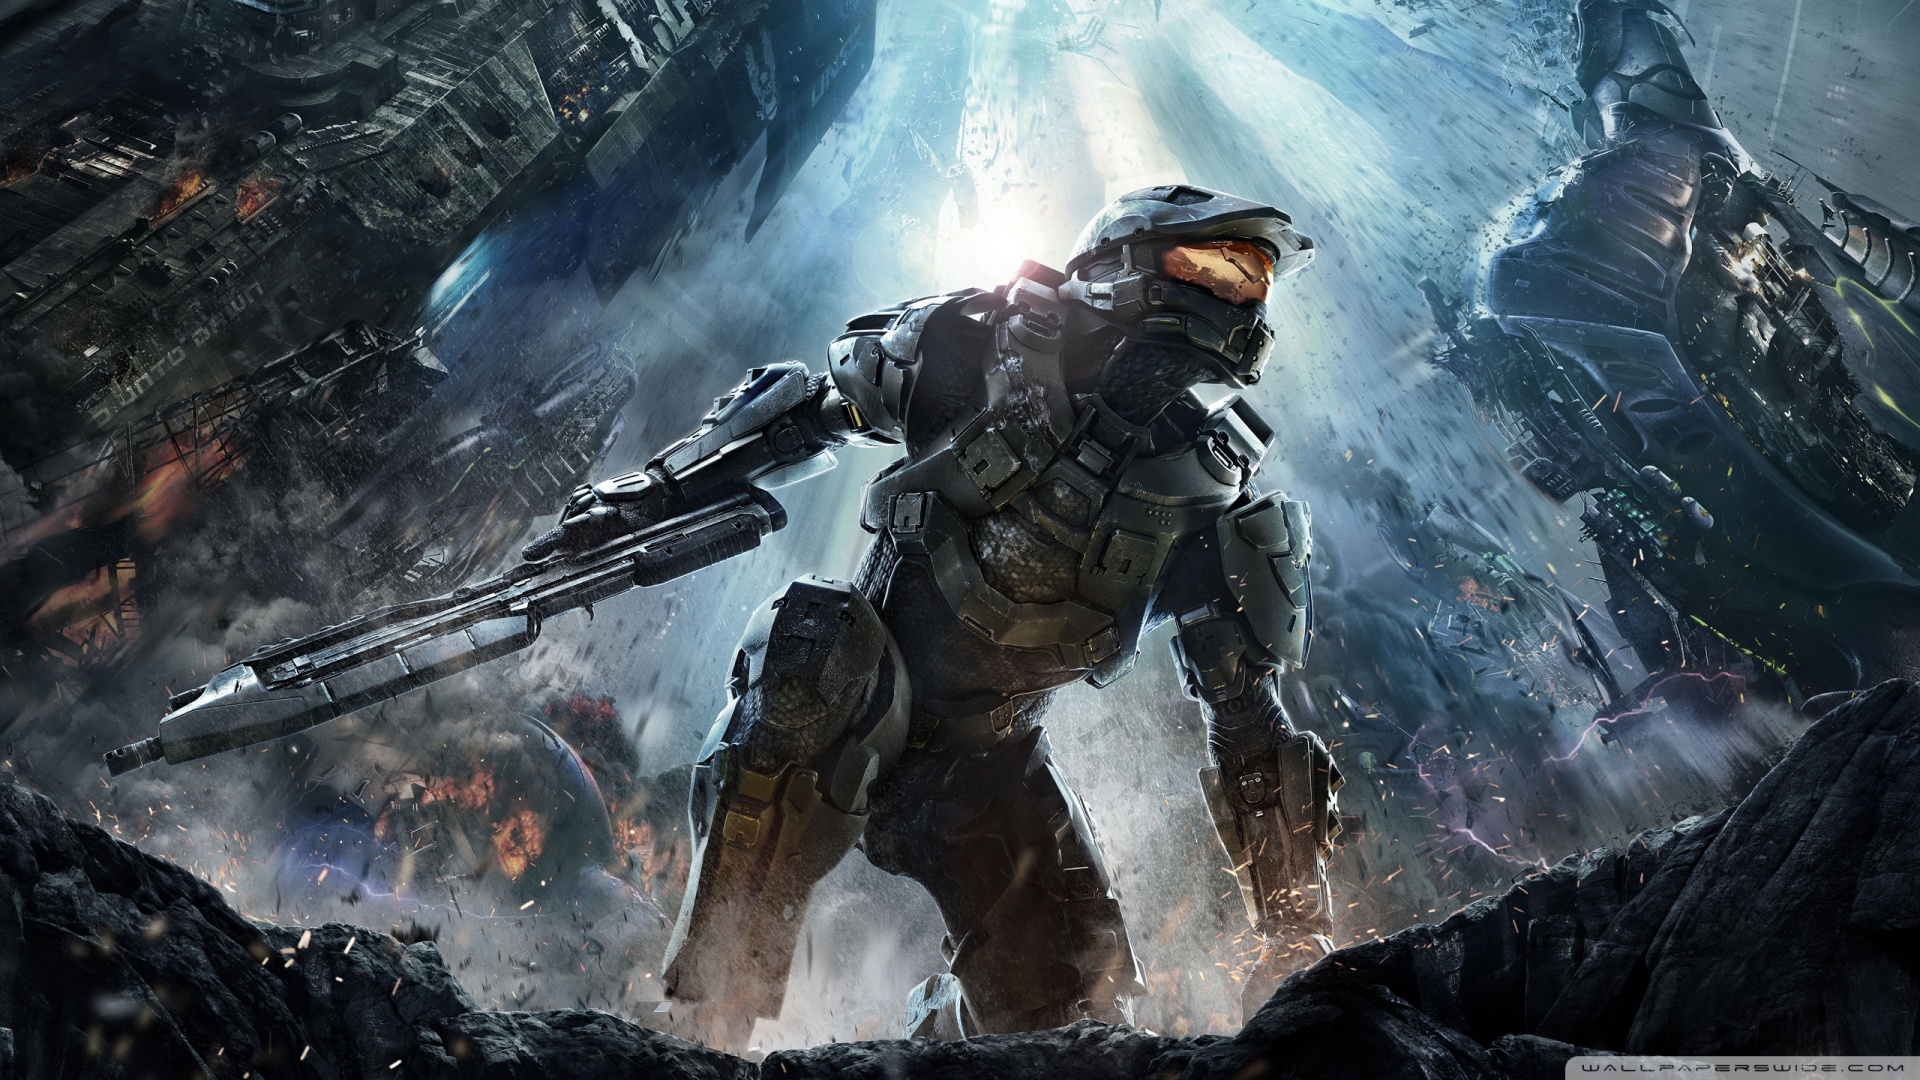 halo wallpaper hd,action adventure game,pc game,shooter game,games,soldier